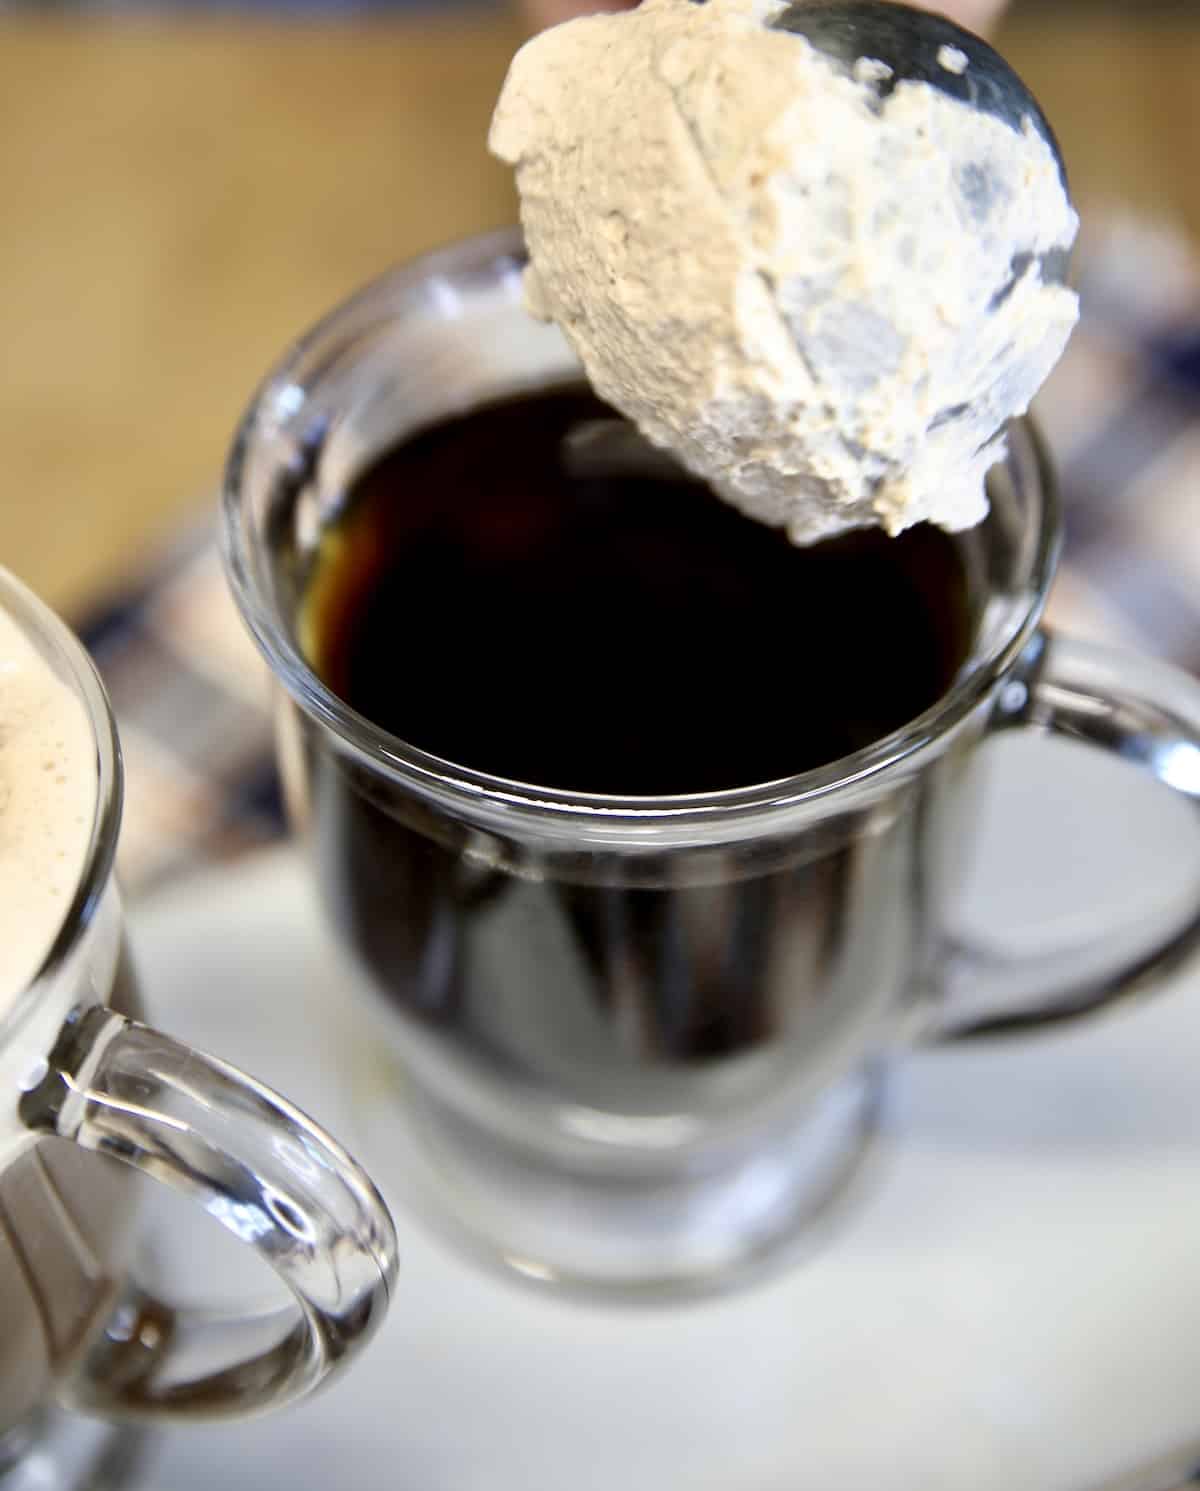 Adding a scoop of whipped cream to mug of coffee.